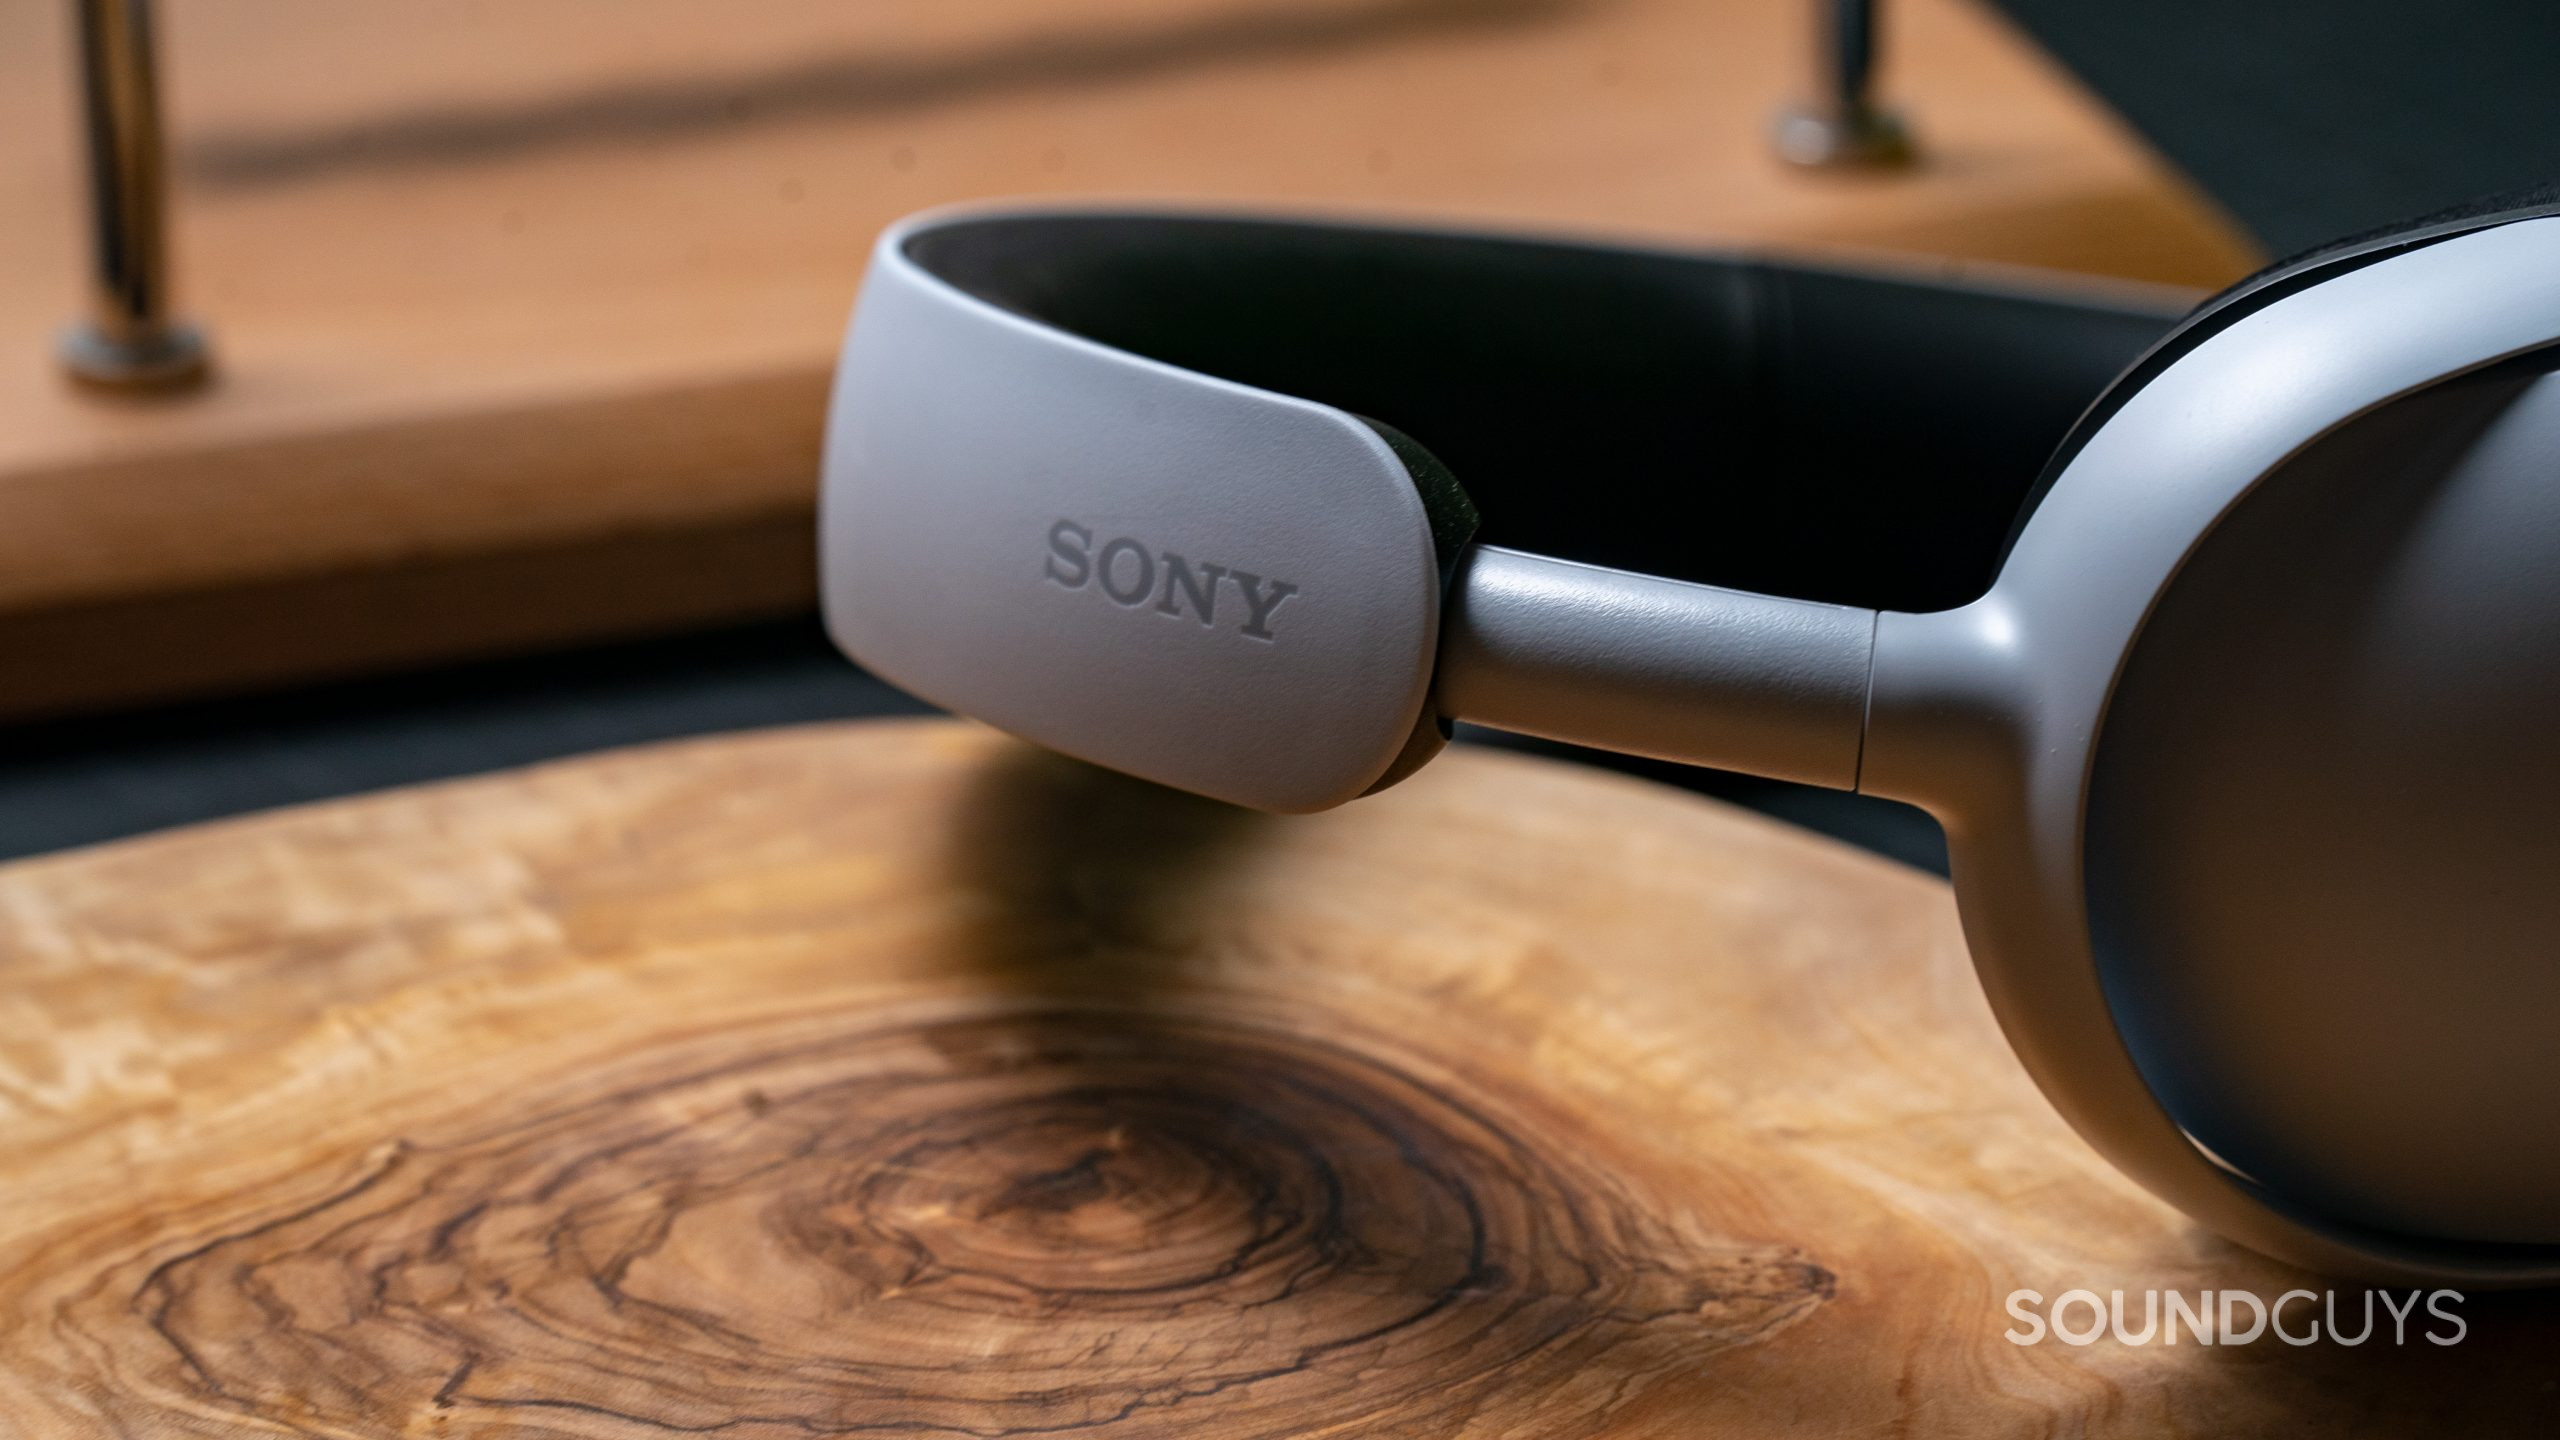 The Sony INZONE H3 sitting on a tabletop with a close up of the Sony logo on the headband.